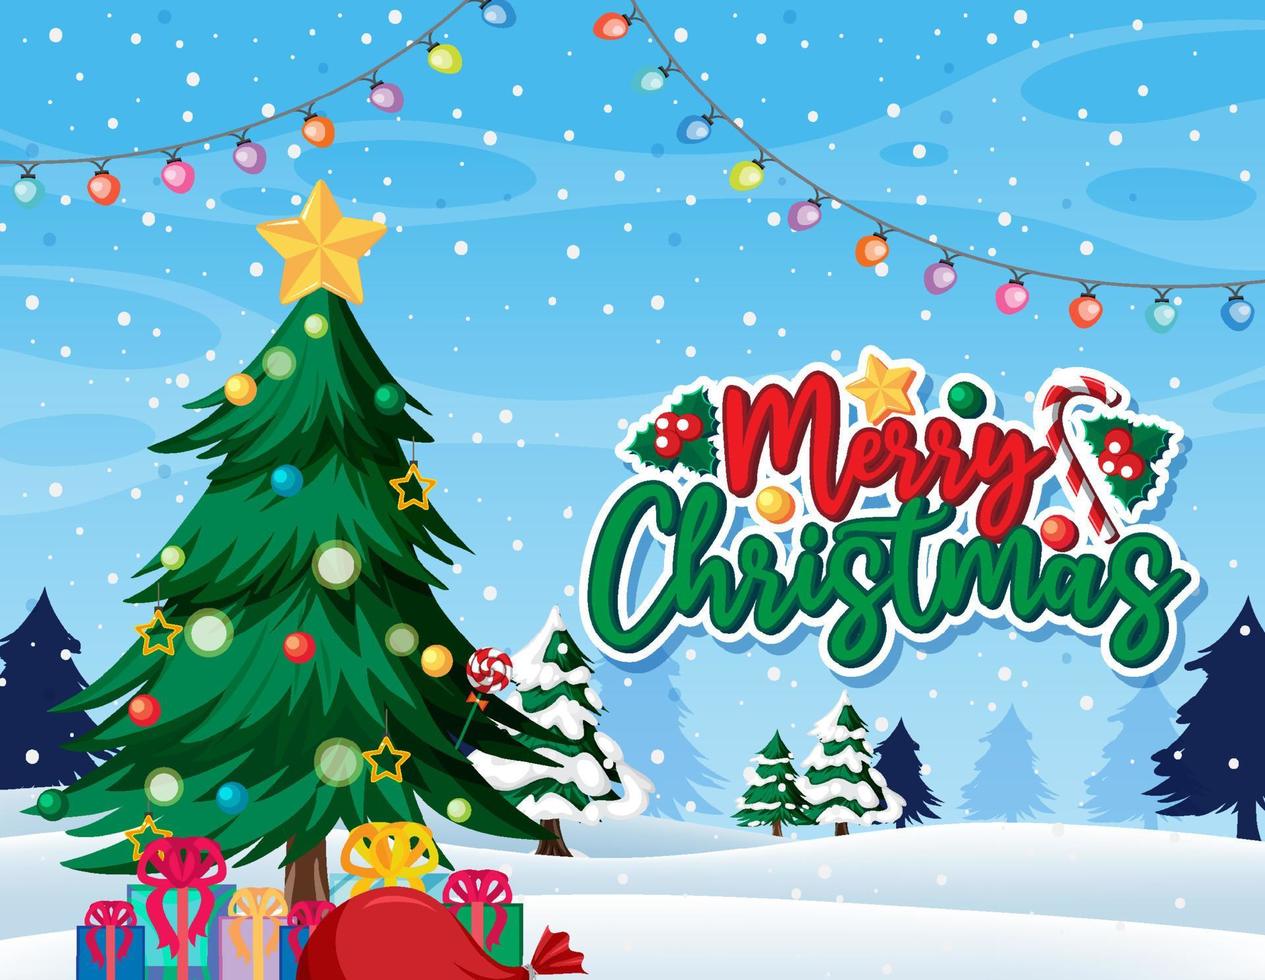 Merry Christmas poster with Christmas tree and ornament vector